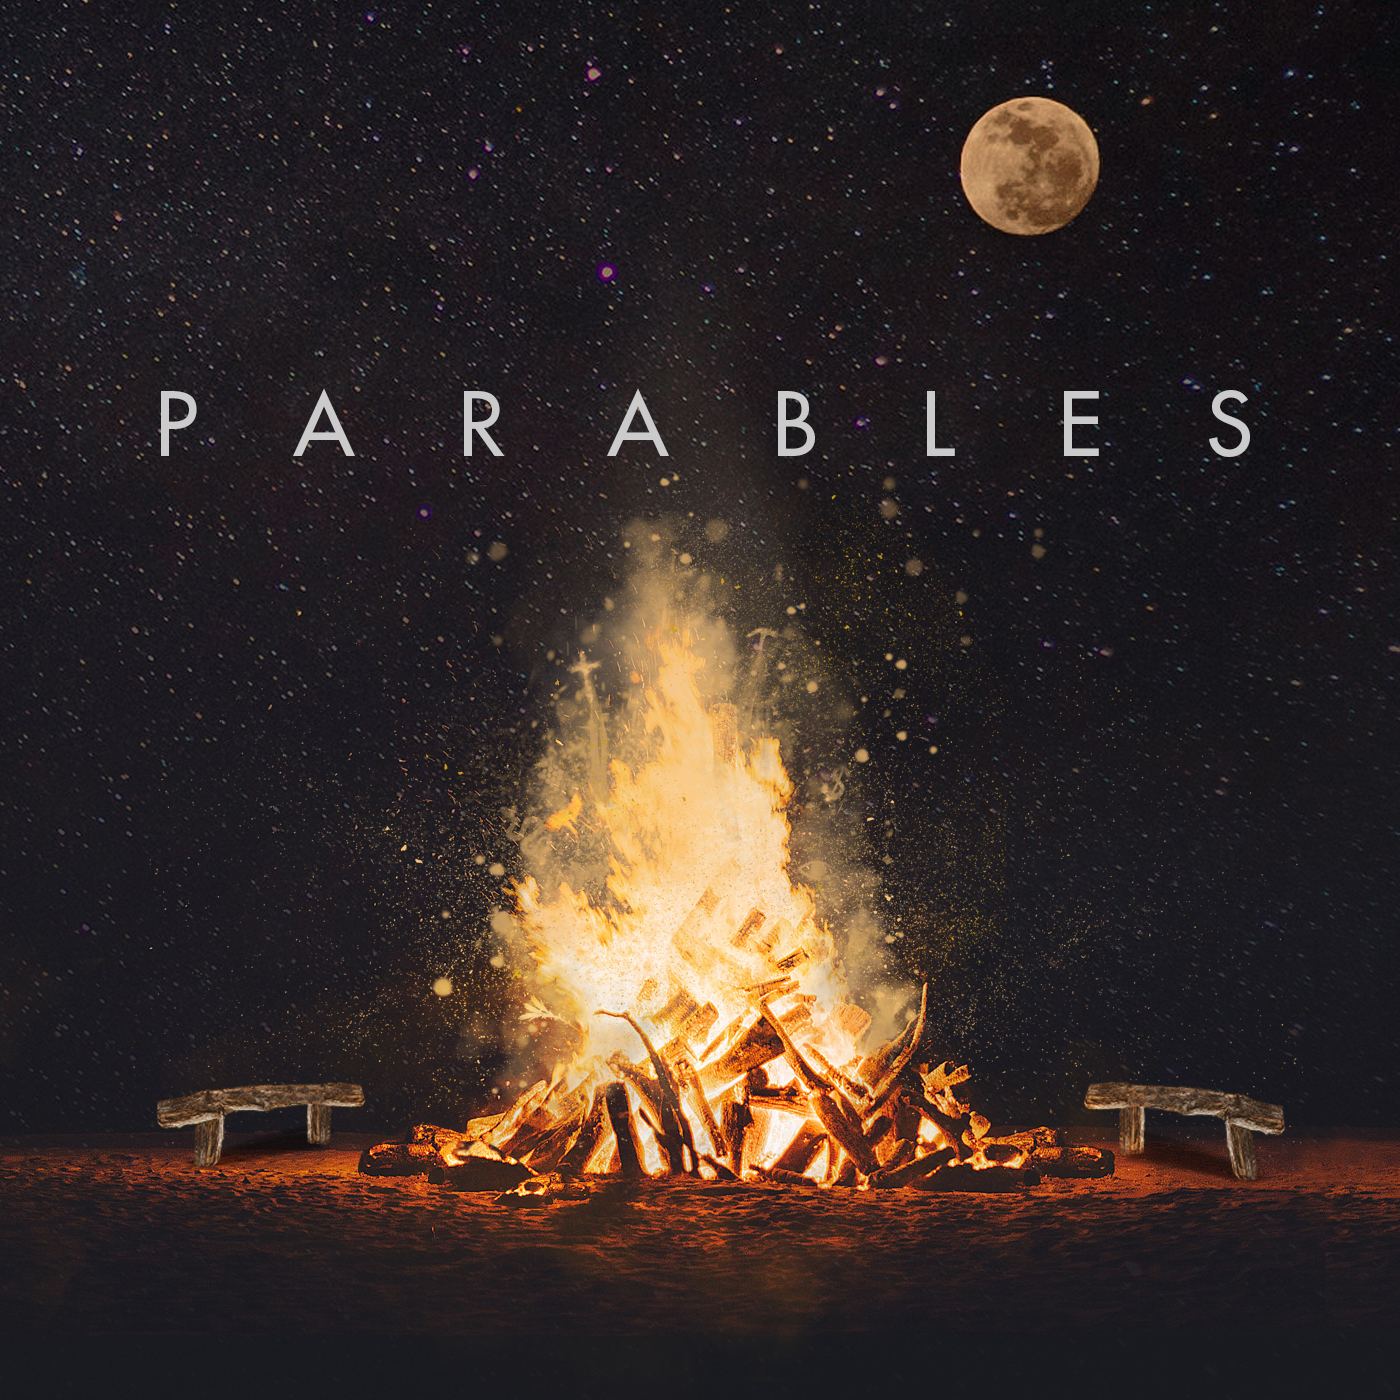 Parables - The Lord's Supper - Chris Wall - 12-1-2019